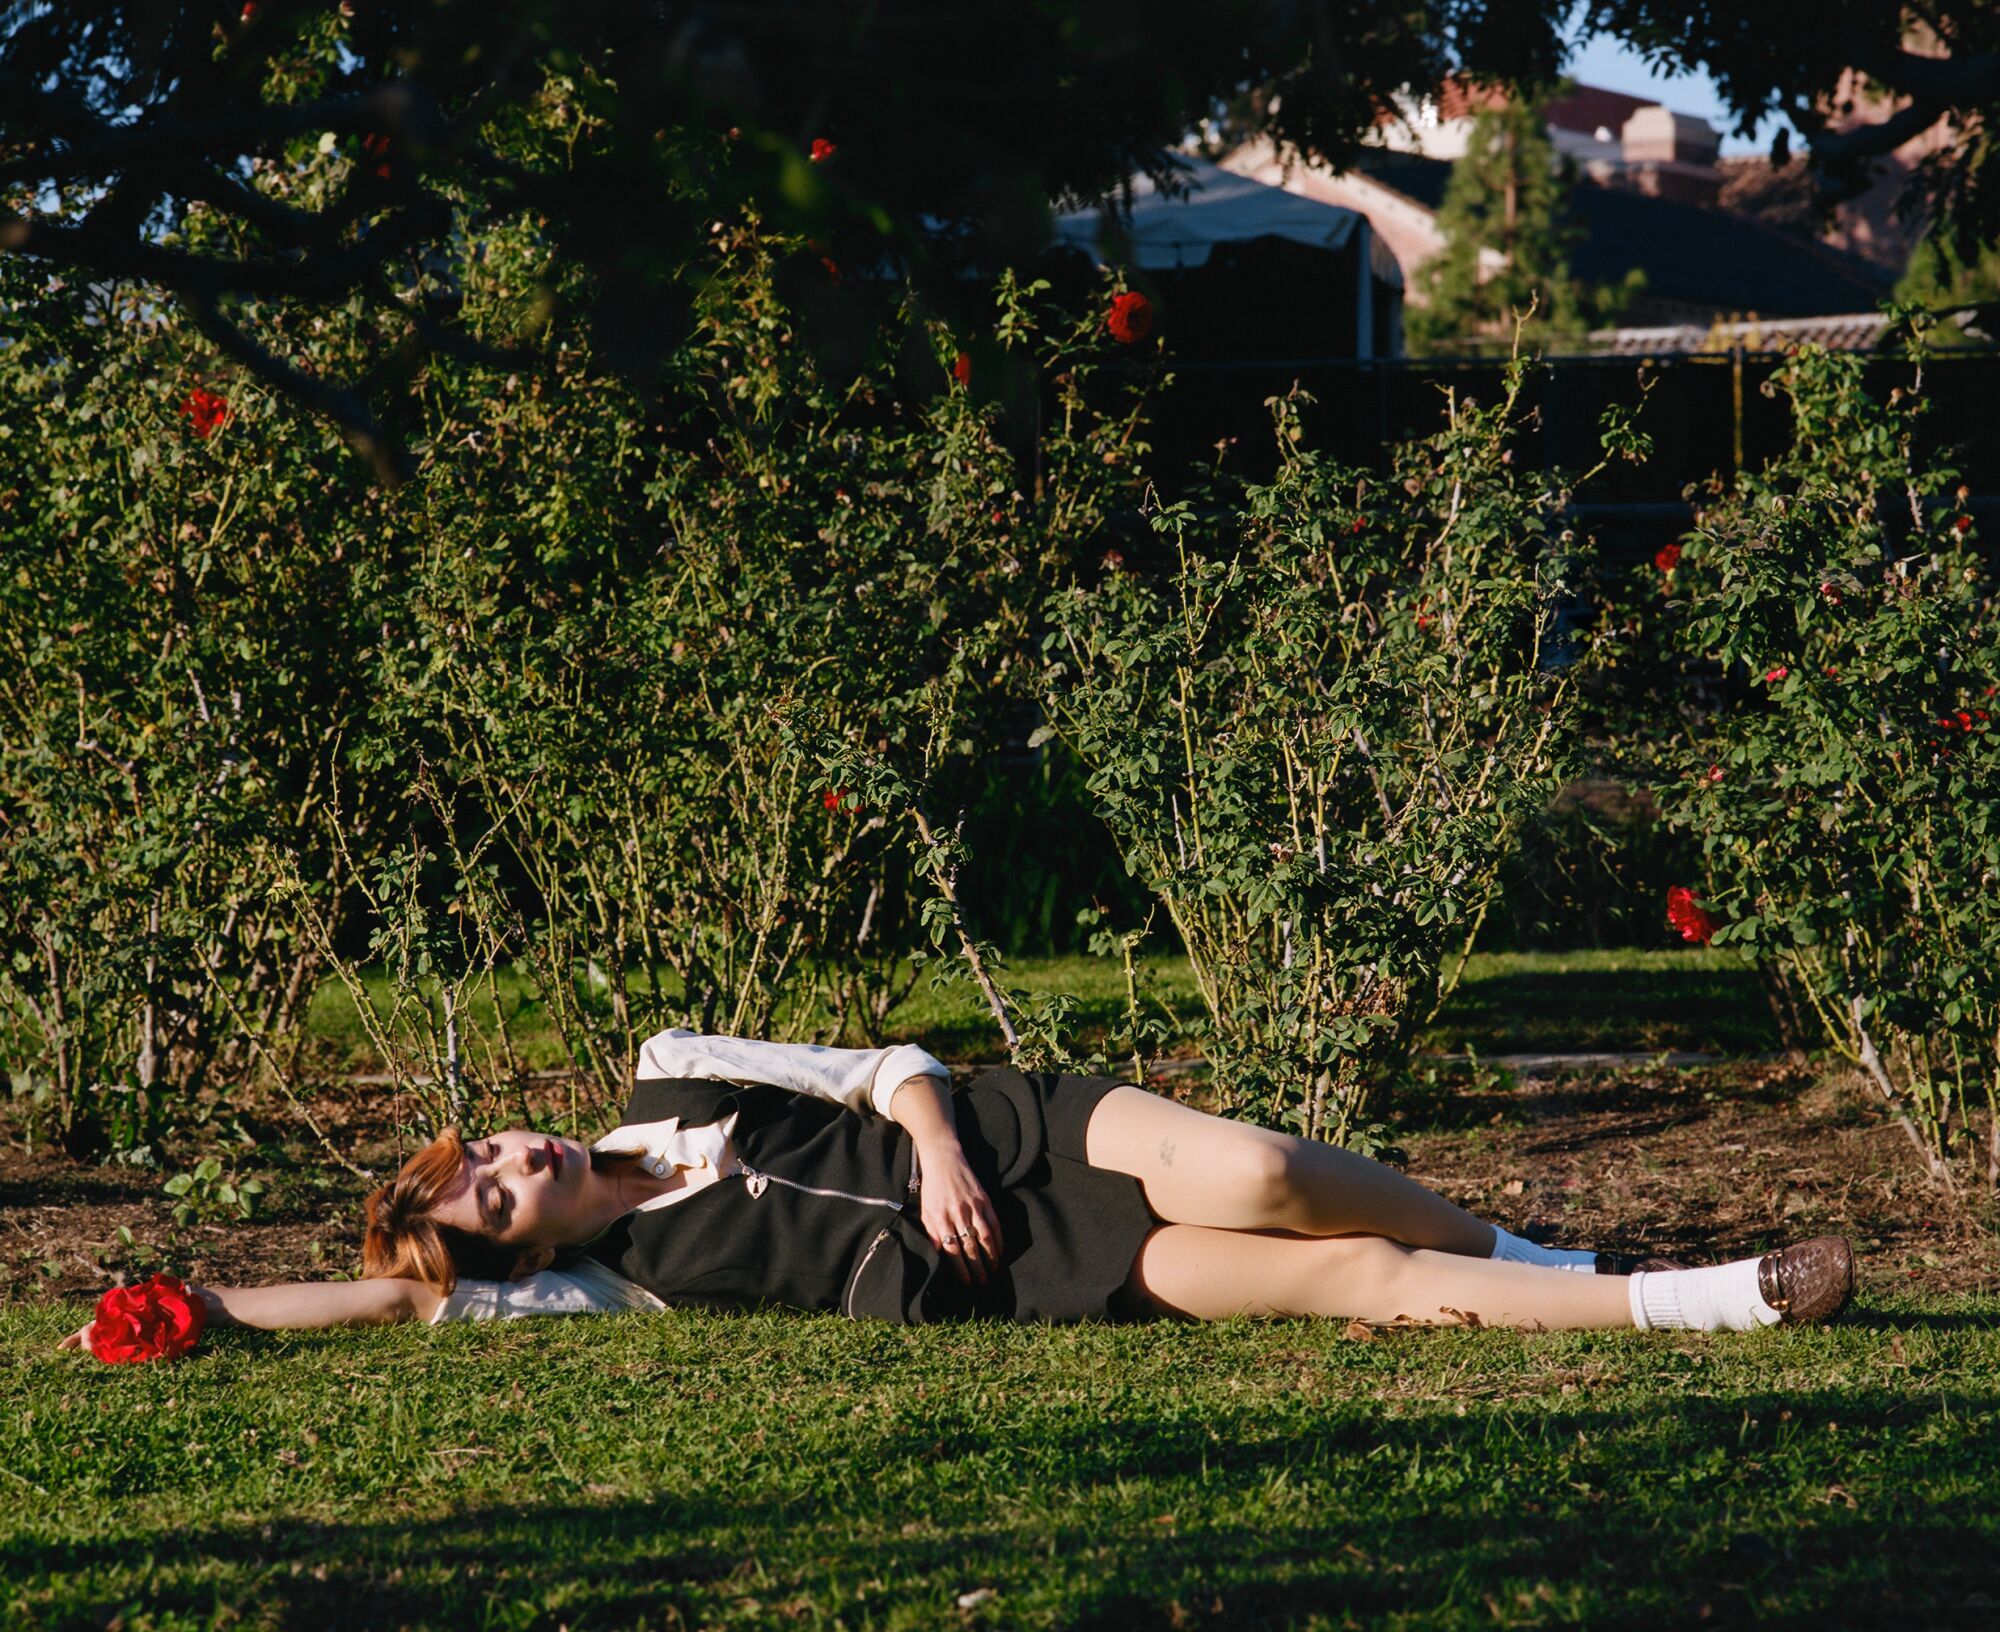 hernandez lying on the grass in exposition park, holding a red rose in her hand.